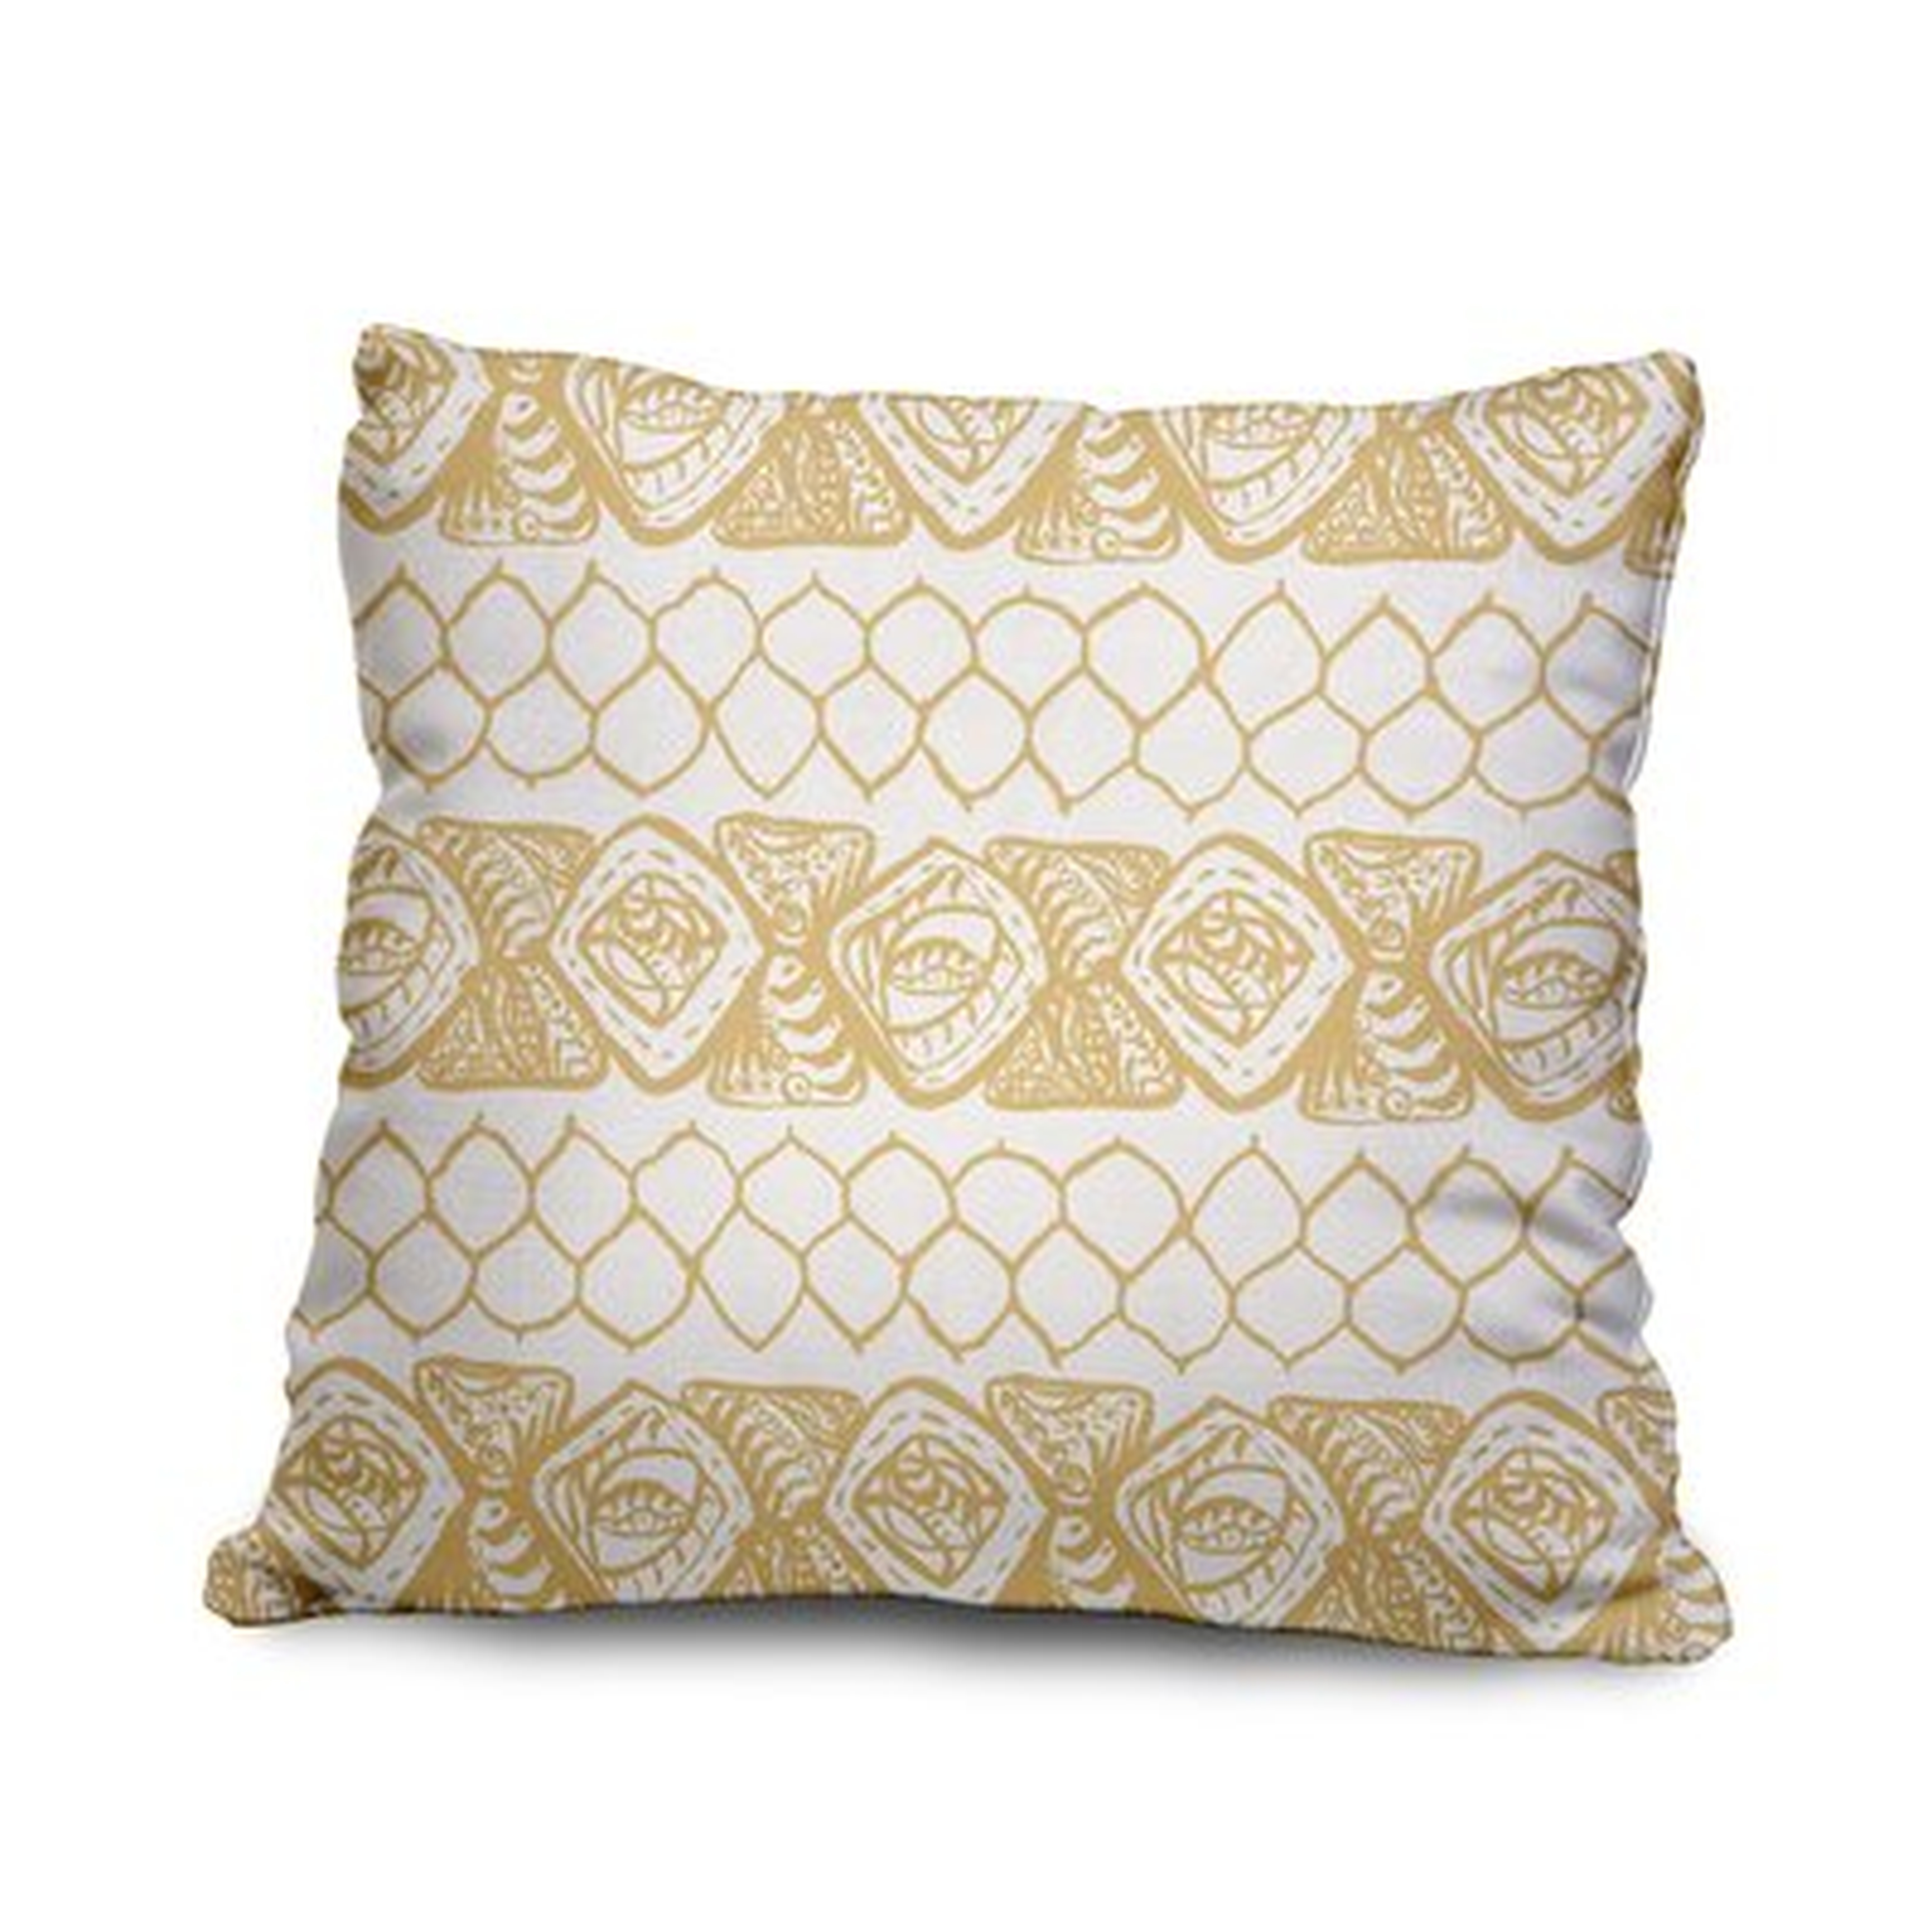 Outdoor Square Pillow Cover & Insert - Wayfair